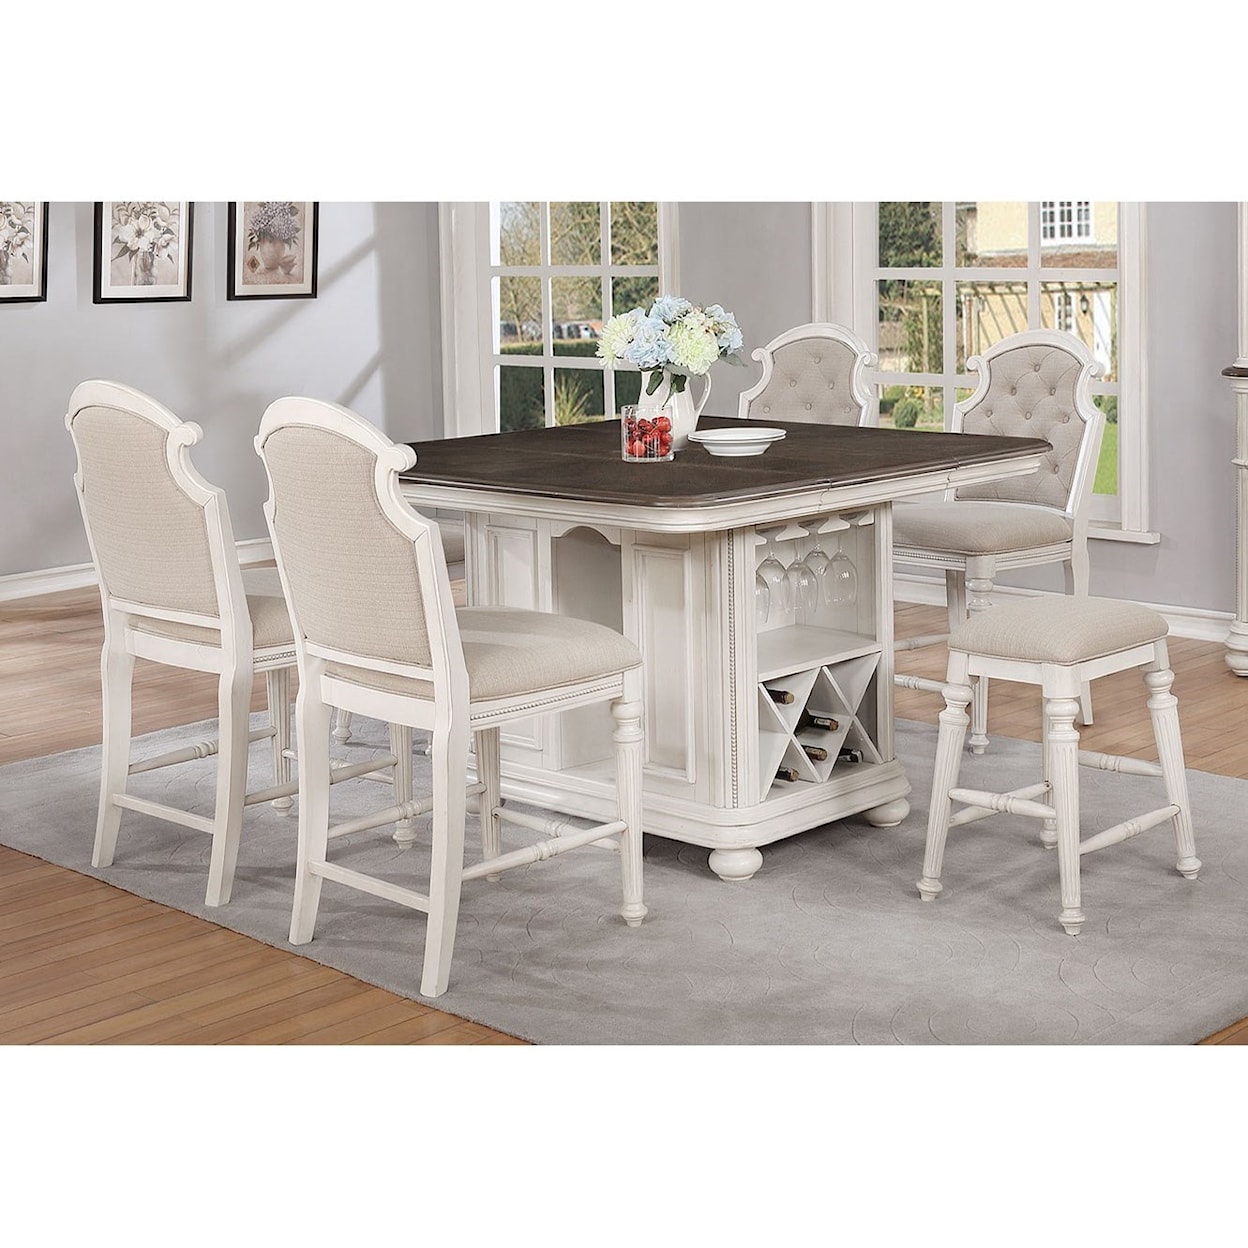 Avalon Furniture West Chester Kitchen Island and Stool Set